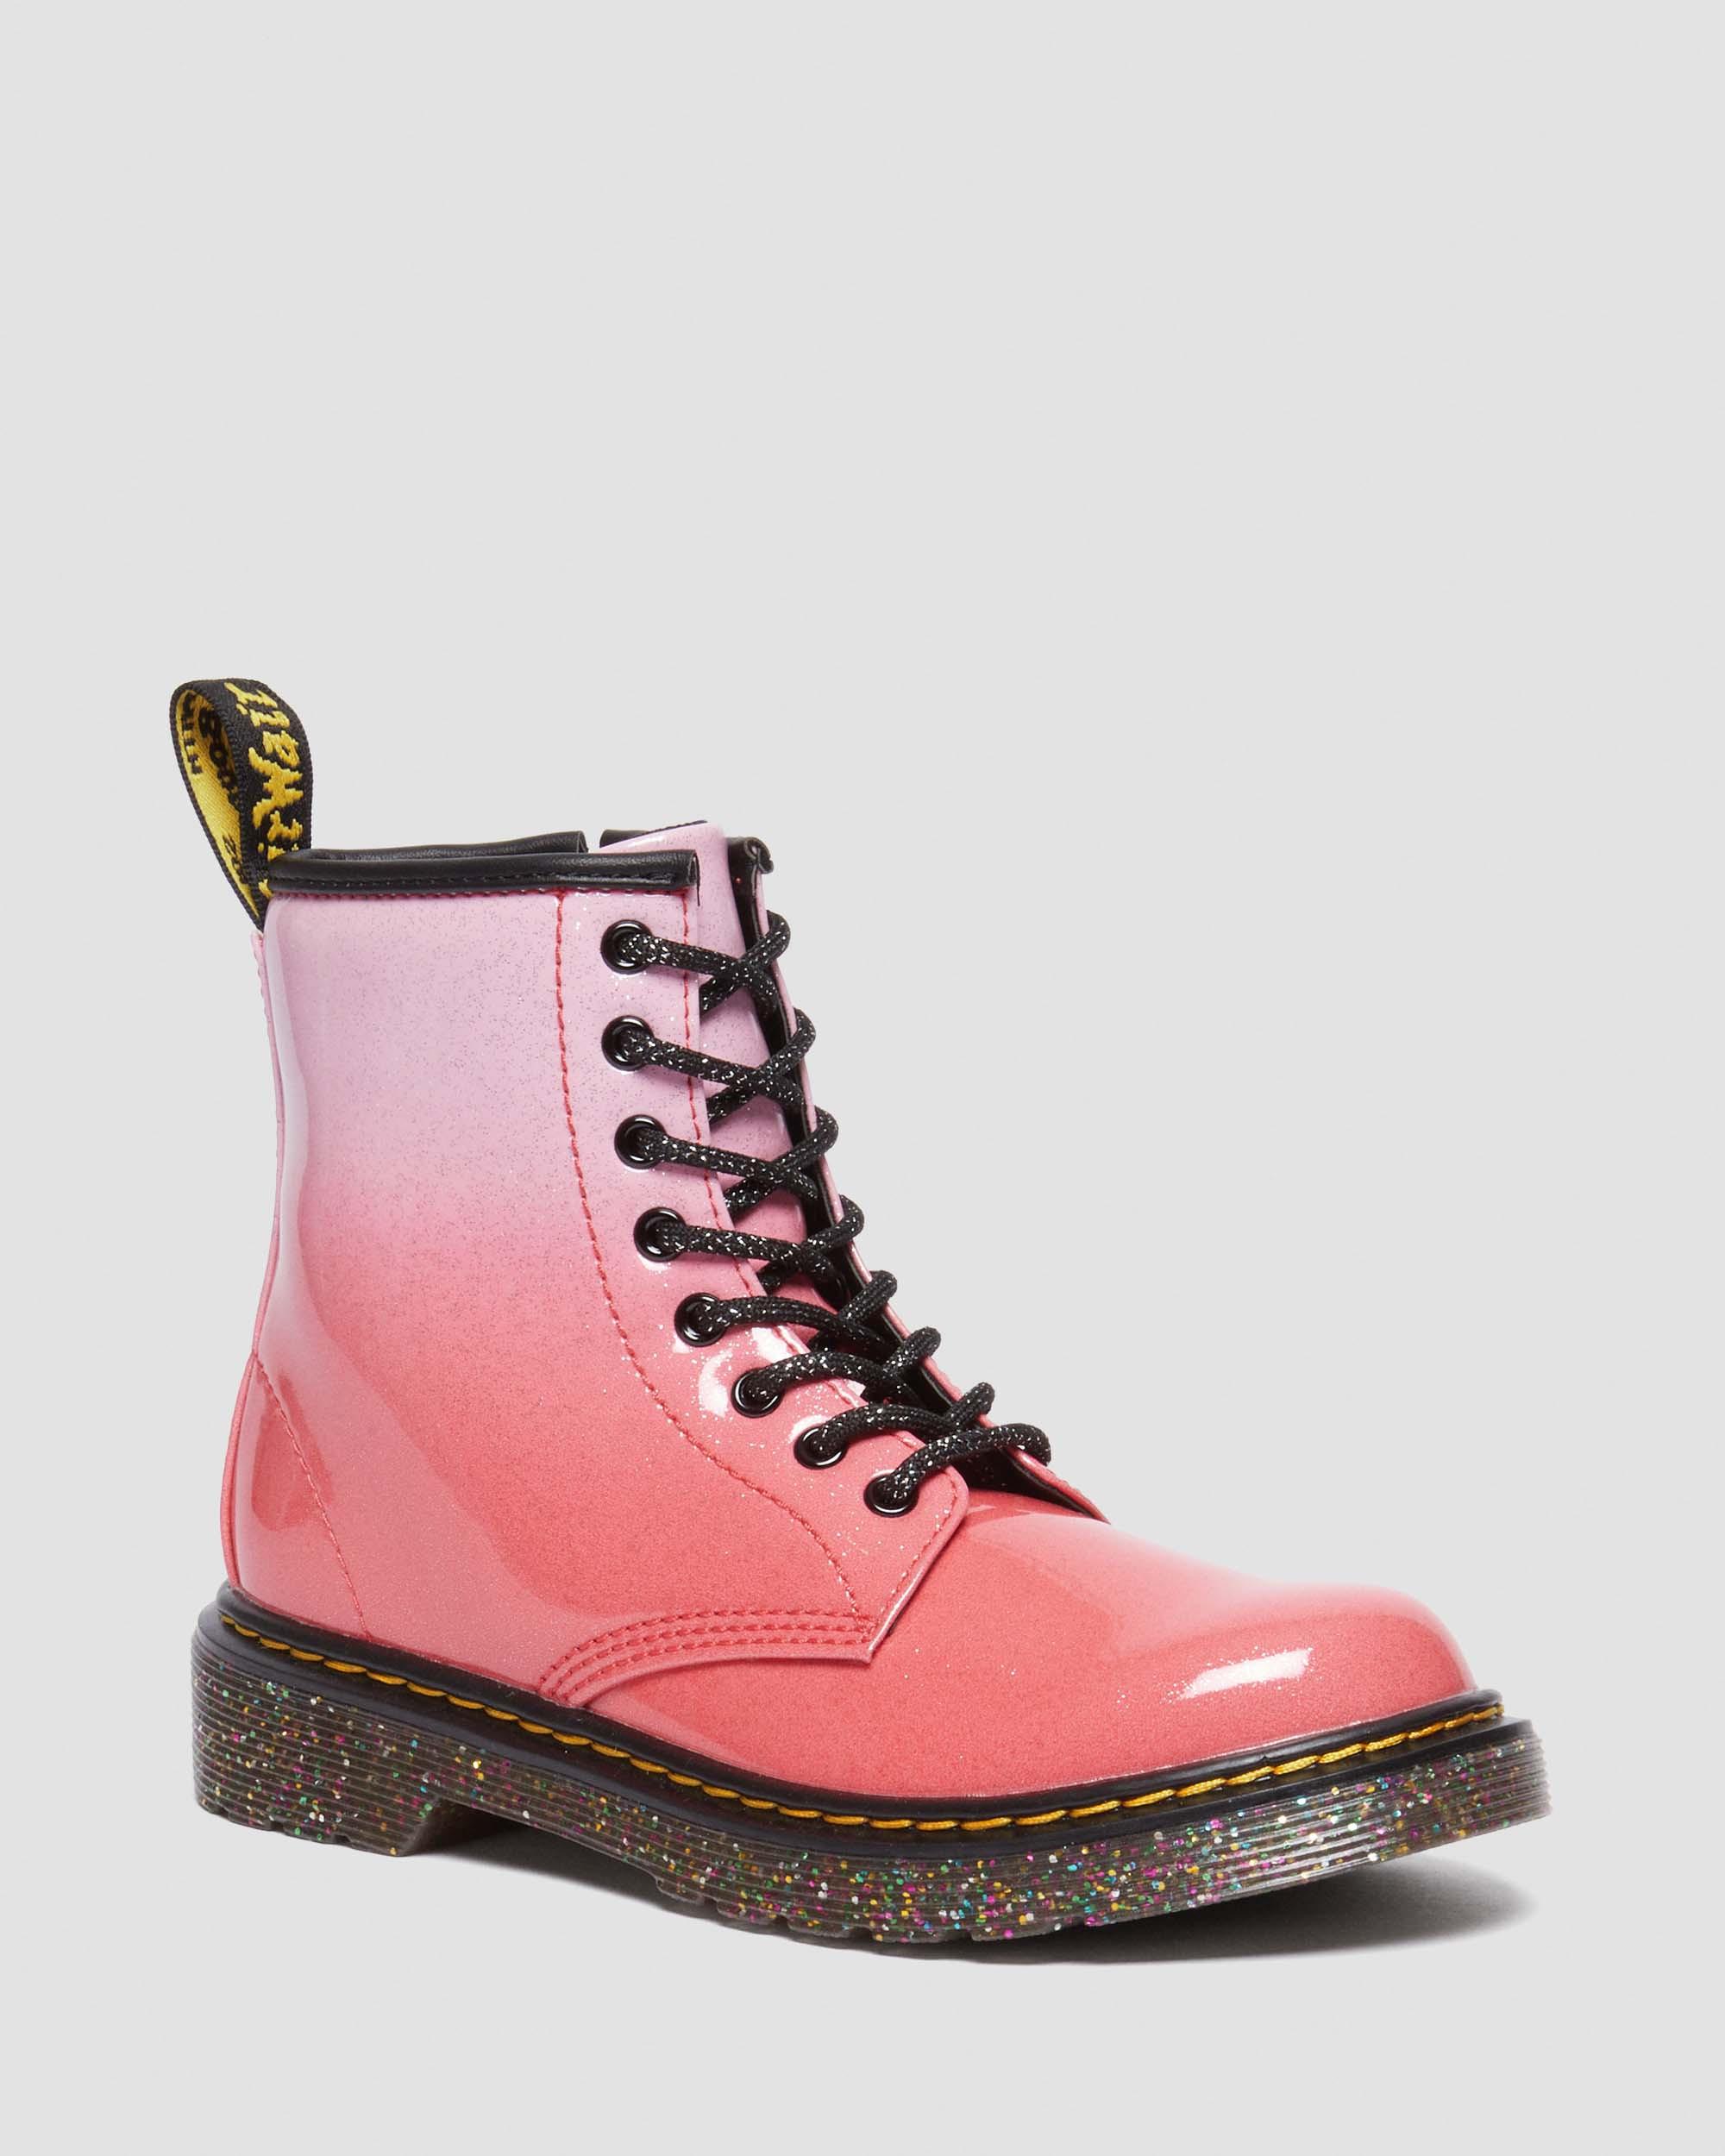 DR MARTENS Junior 1460 Gradient Glitter Leather Lace Up Boots